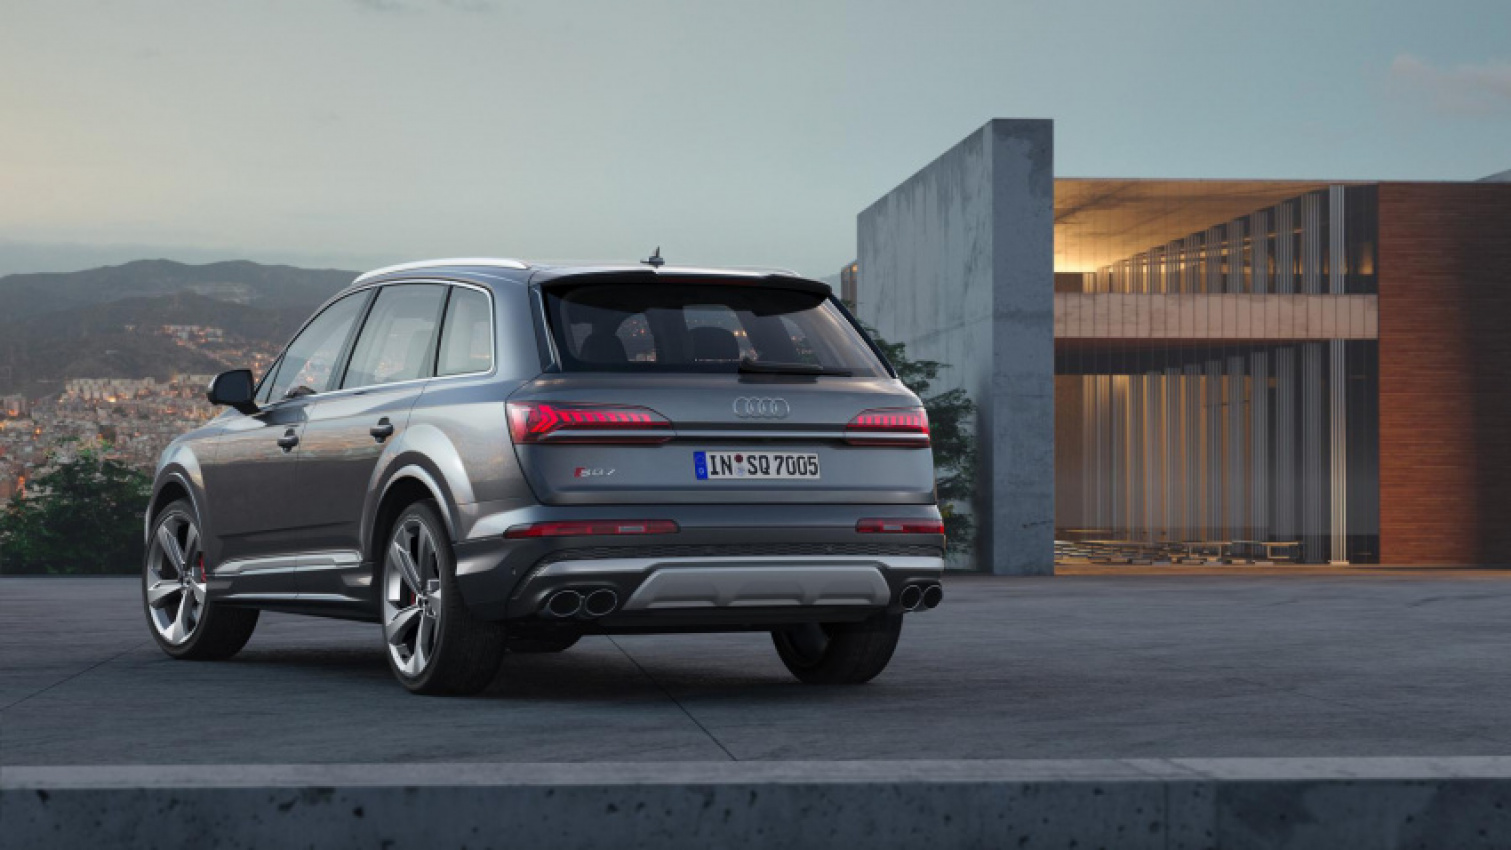 audi, autos, cars, news, android, audi sq7 tdi, audi sq8 tdi, sq7, sq8, android, new diesel audi sq7 and sq8 in south africa – massive power and big price tag